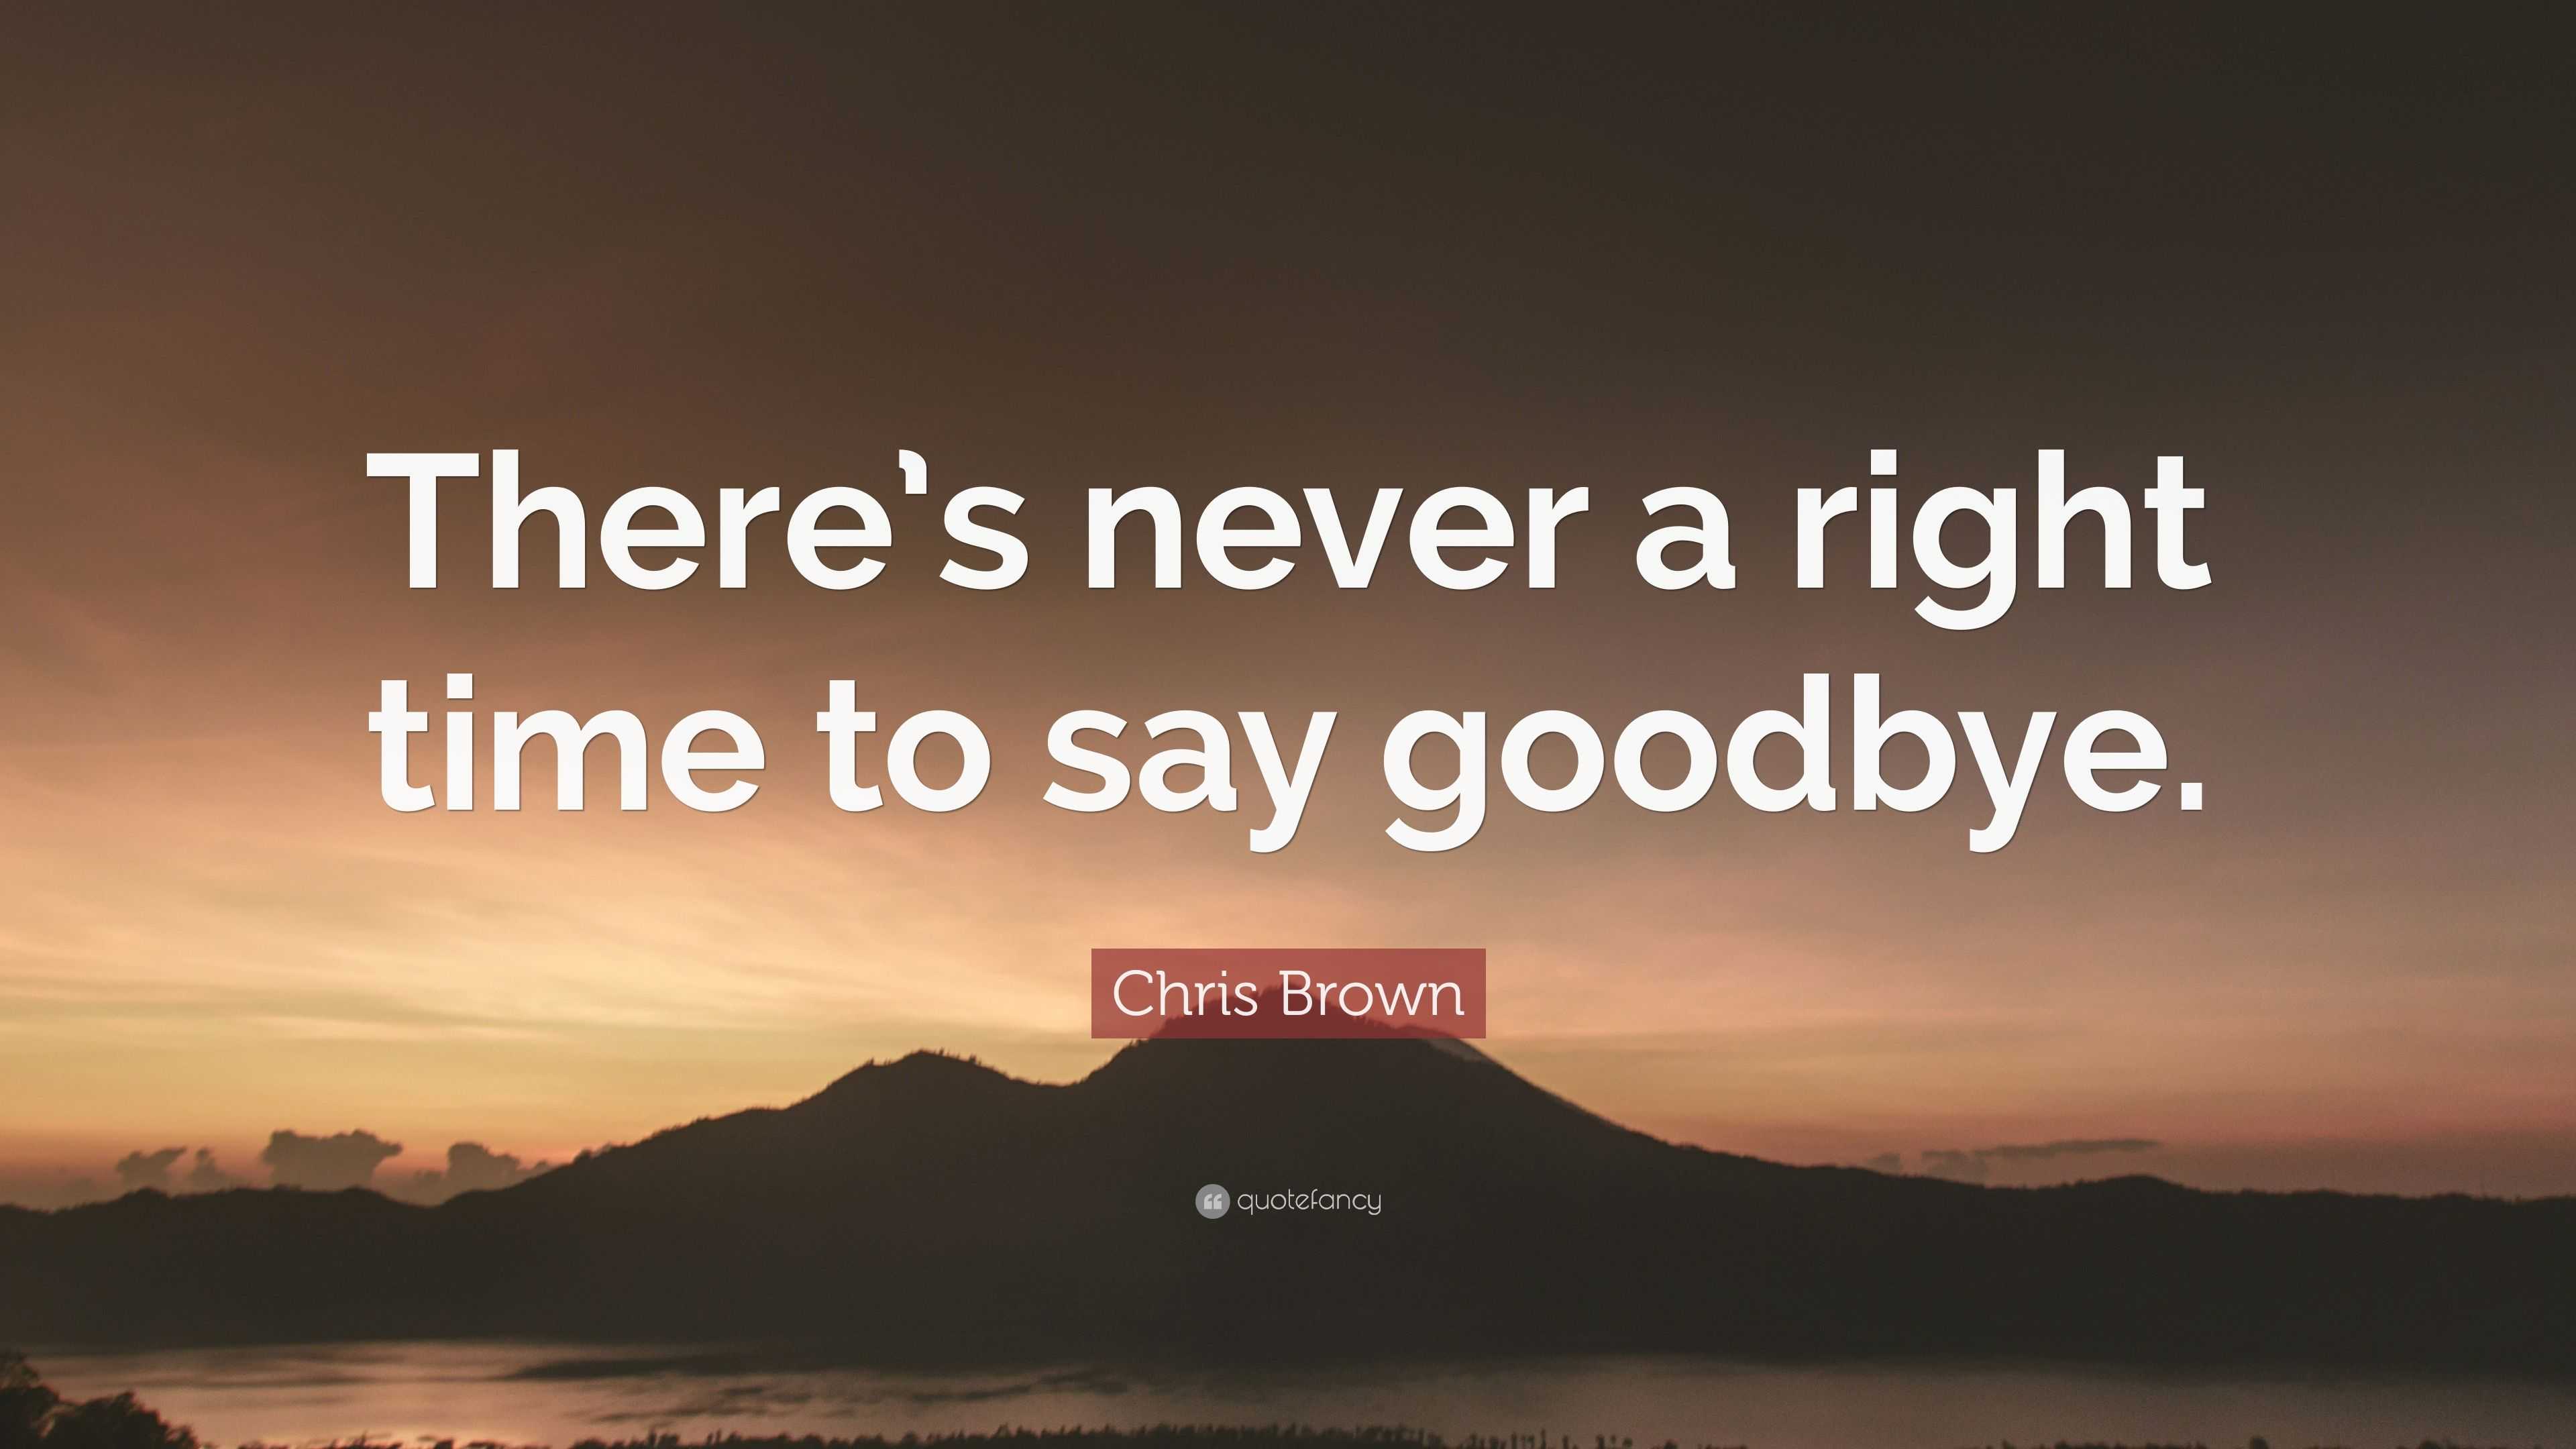 Chris Brown Quote: “There’s never a right time to say goodbye.” (20 wallpapers ...